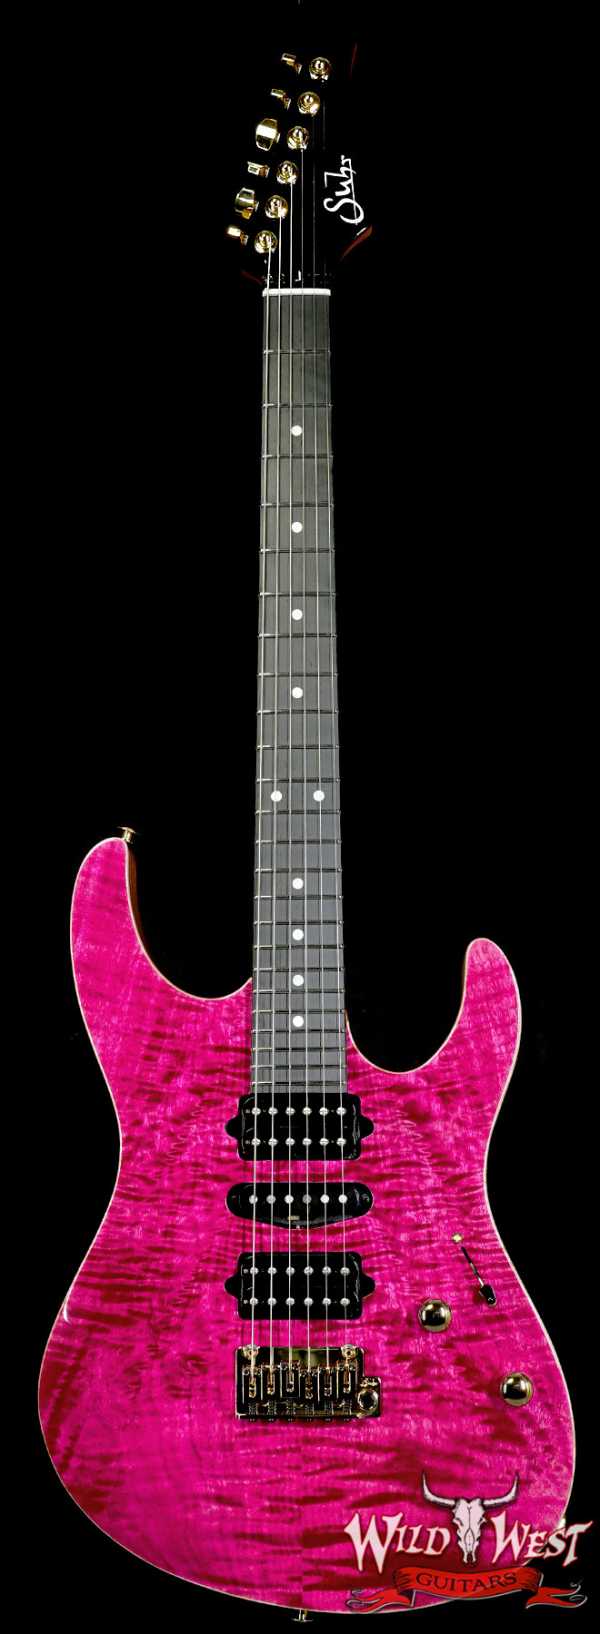 Suhr Custom Modern HSH Flame Maple Top Genuine Mahogany Body & Neck Indian Rosewood Fingerboard Magenta Pink 7.95 LBS